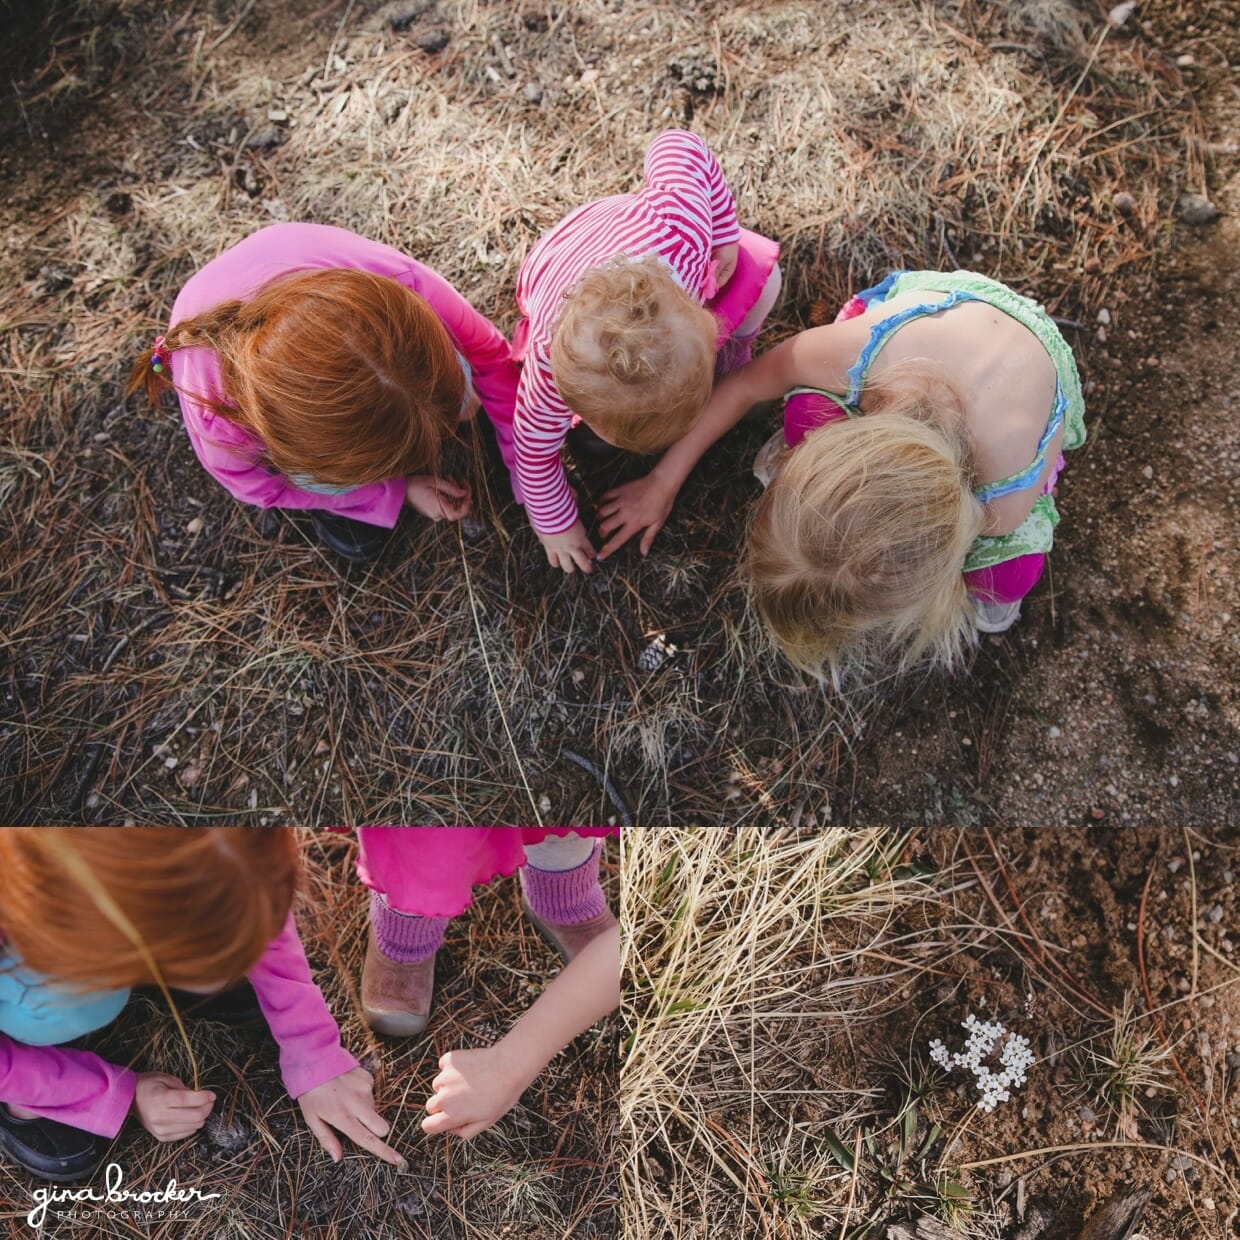 Three kids explore nature during their candid family photo shoot